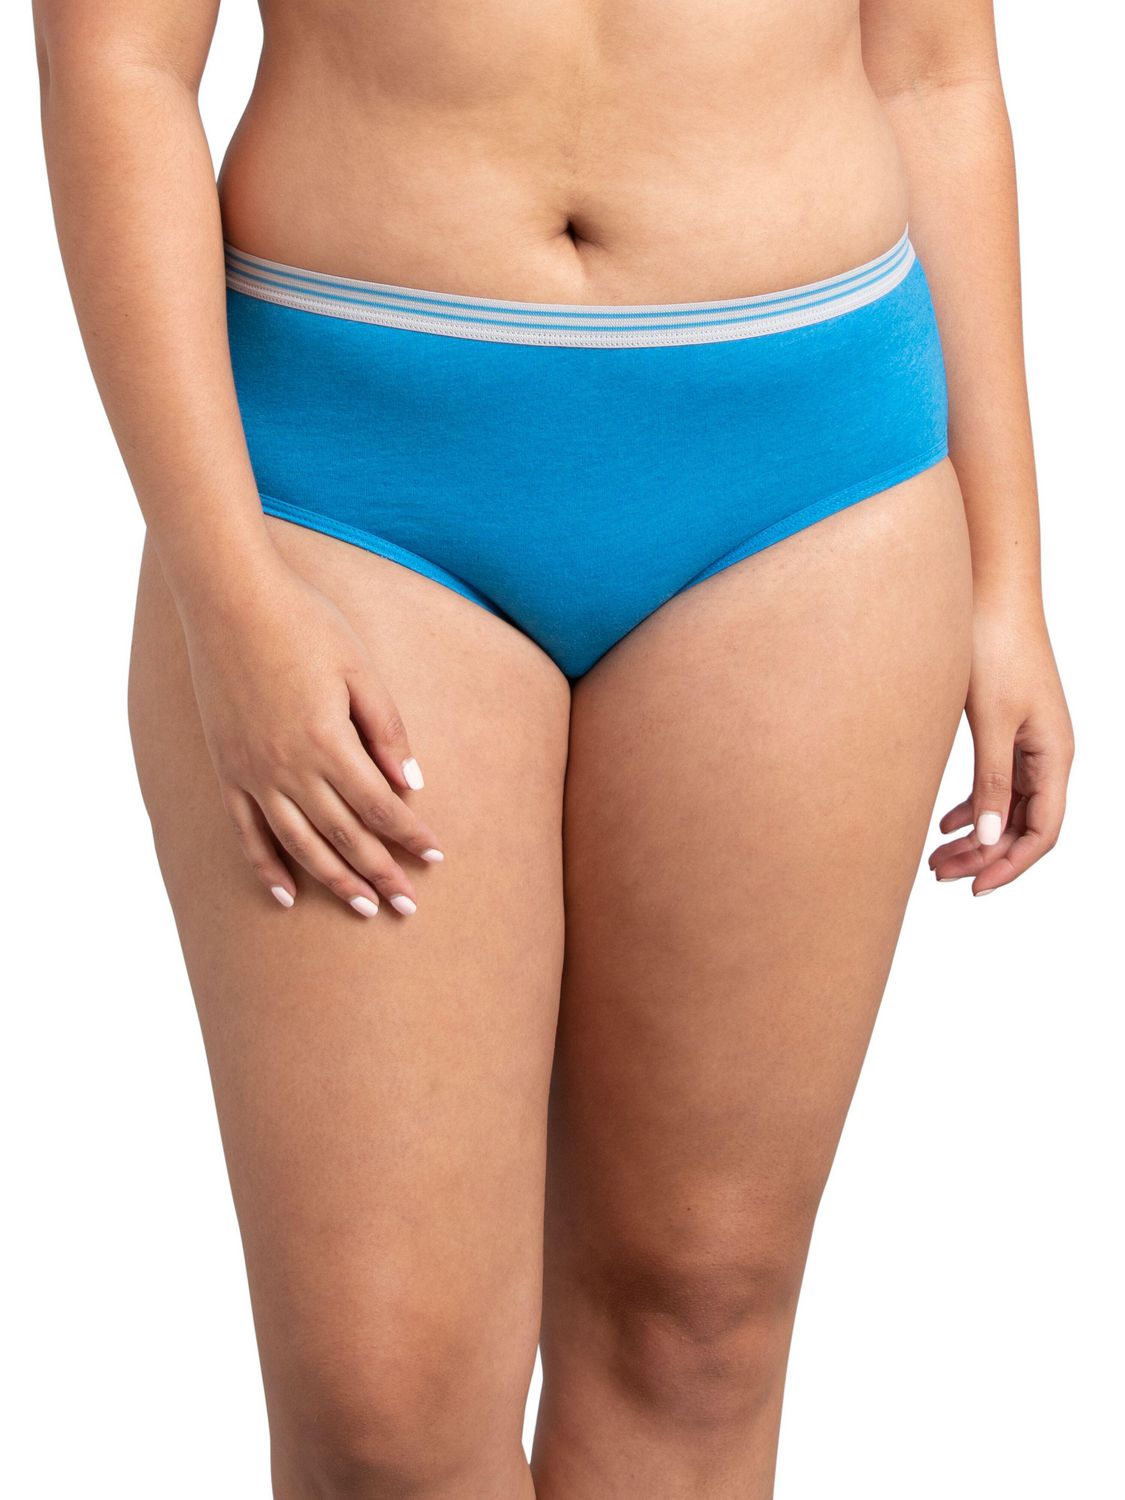 Fruit of the Loom Women's Heather Low Rise Briefs, 6-Pack, Sizes 5